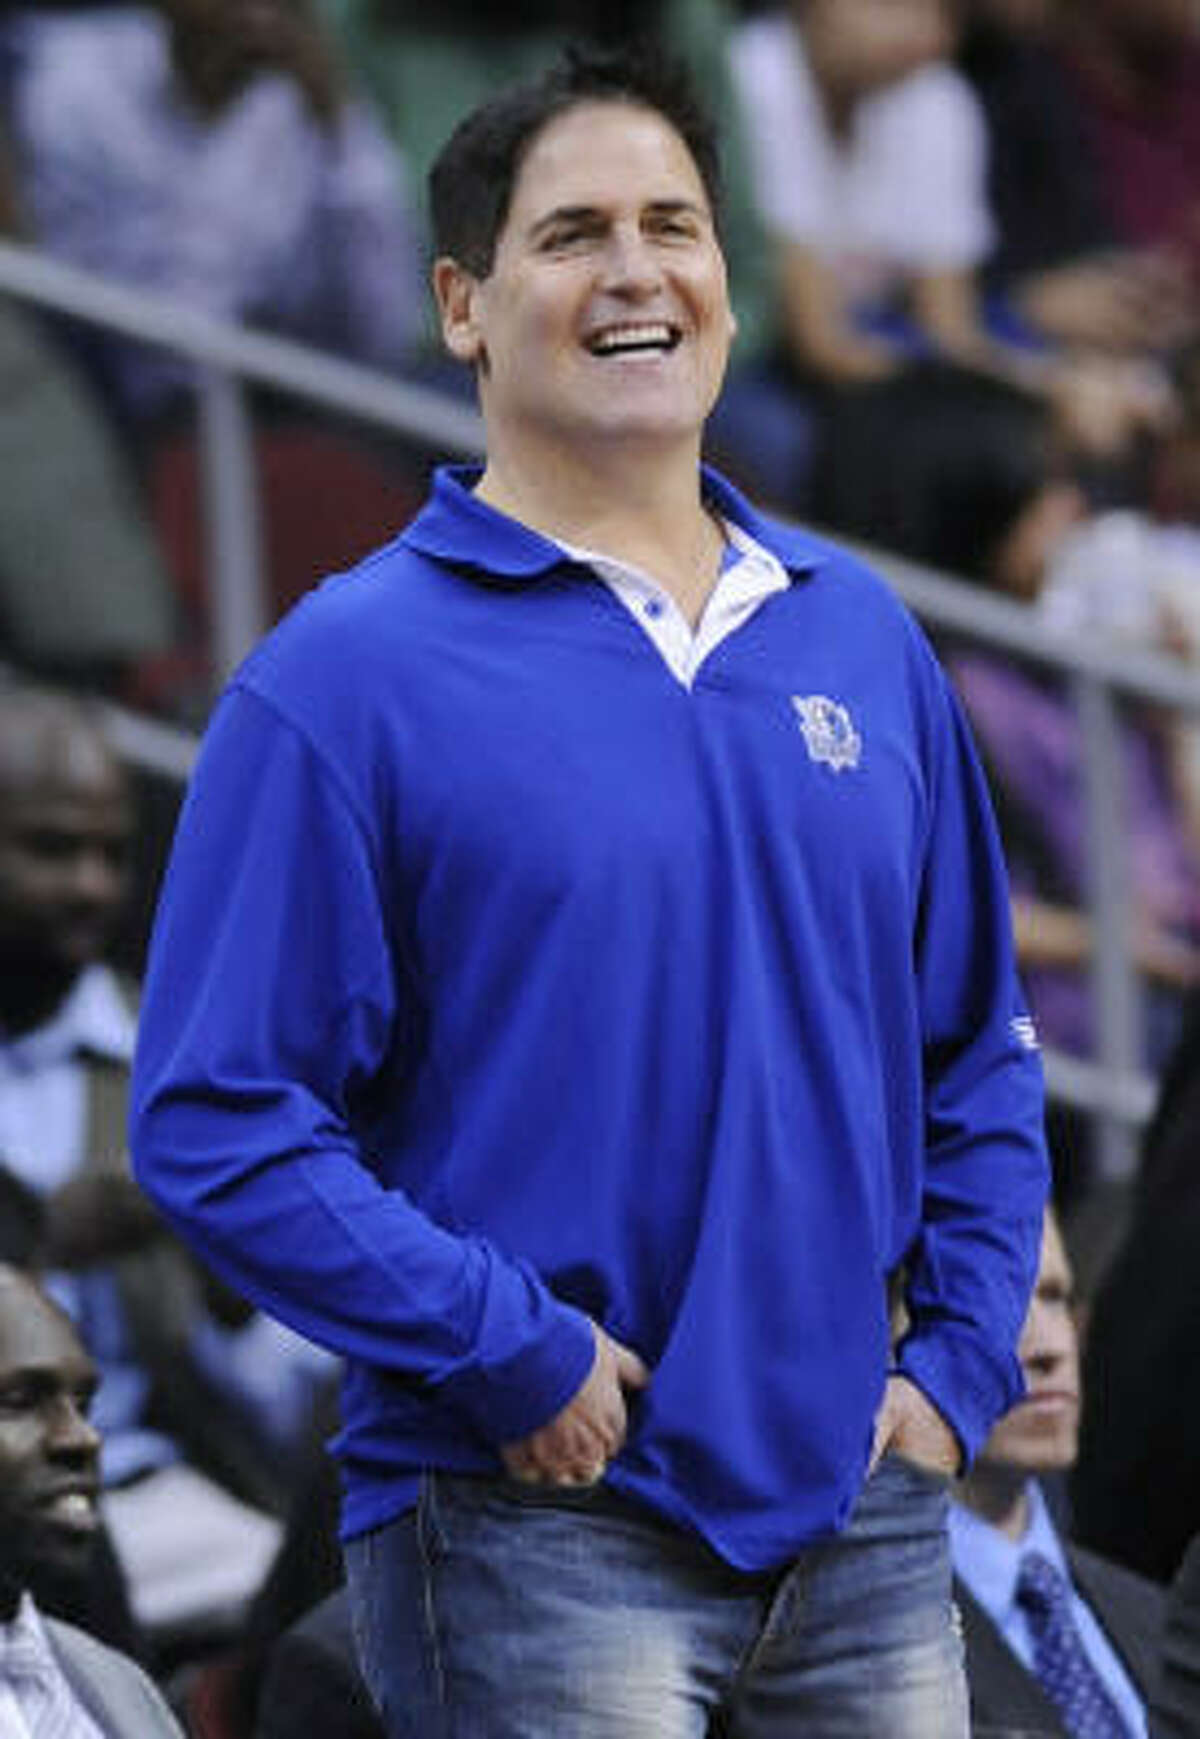 Owner of the Dallas Mavericks, Mark Cuban was recognized for reimbursing employees for meals purchased at Dallas eateries, as well as continuing to pay employees of the American Airlines Center. In addition, he was touted for teaming up with Mavericks Luka Doncic and Dwight Powell to donate $500,000 to support healthcare workers at the University of Texas Southwestern Medical Center and Parkland Health & Hospital System, according to Forbes.